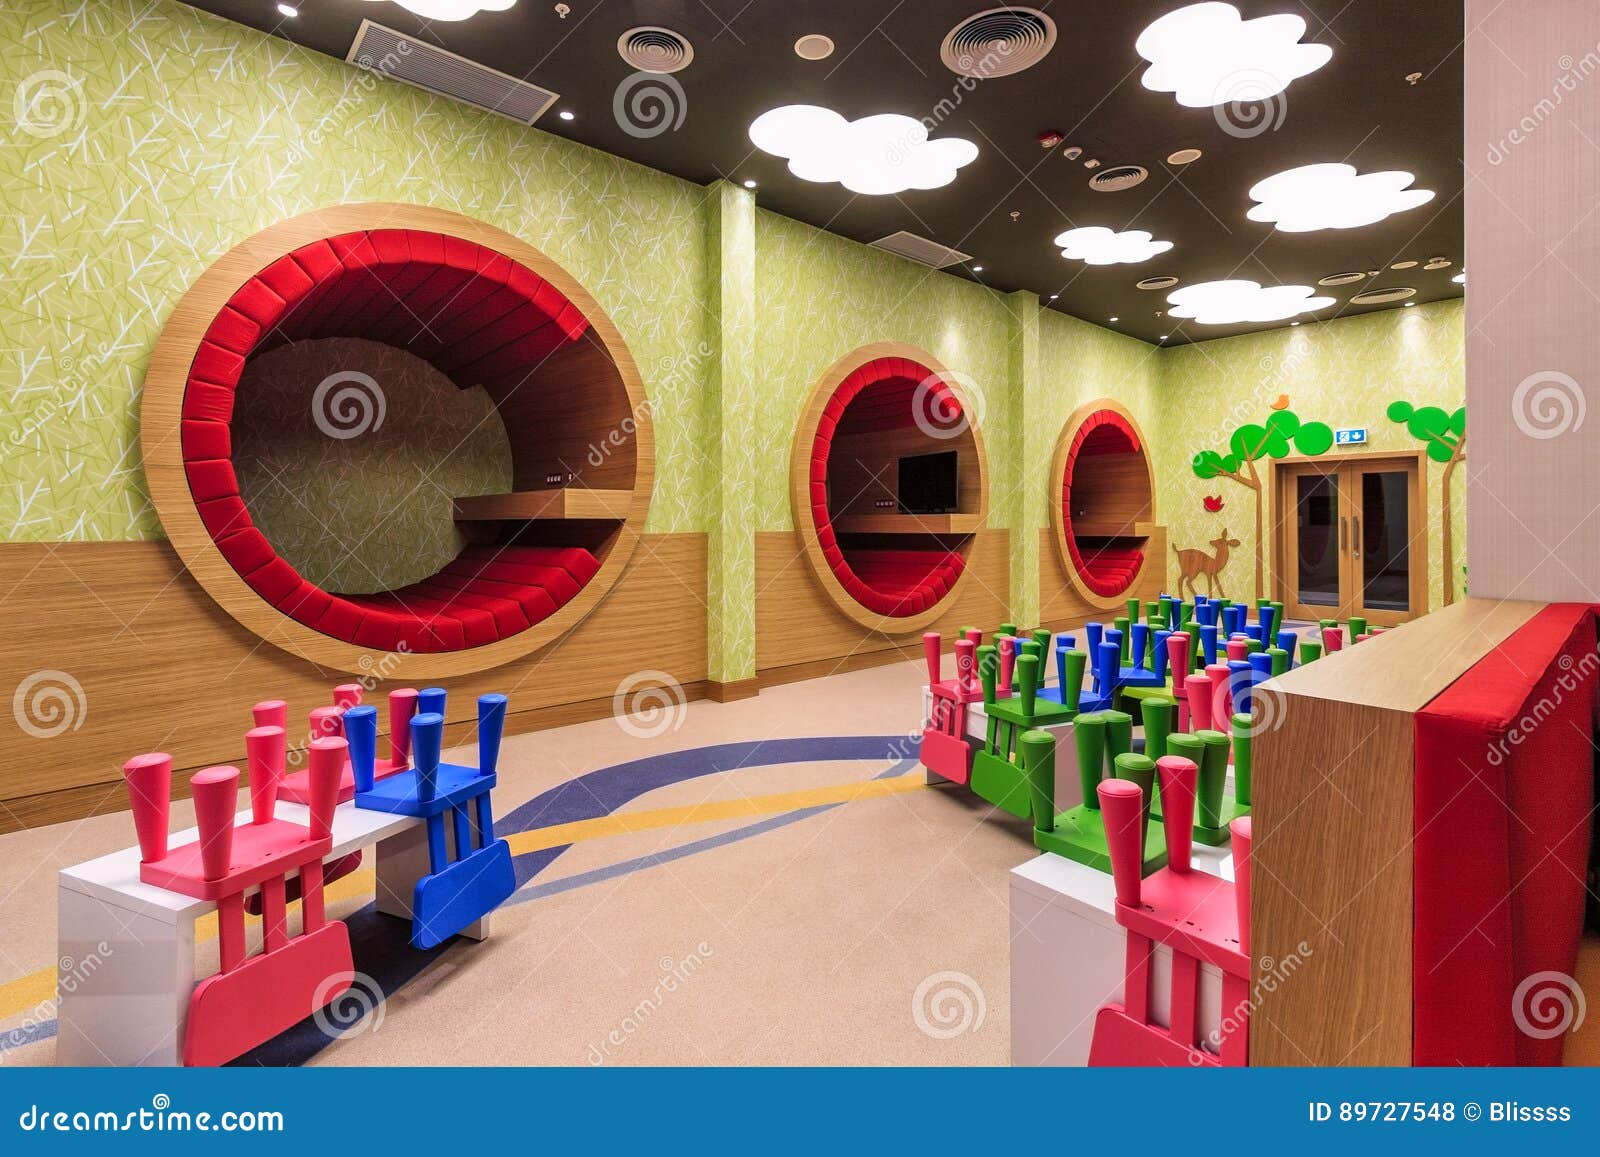 Toy Story, Play School at Bangalore, by Collage Architecture Studio -  ArchitectureLive!